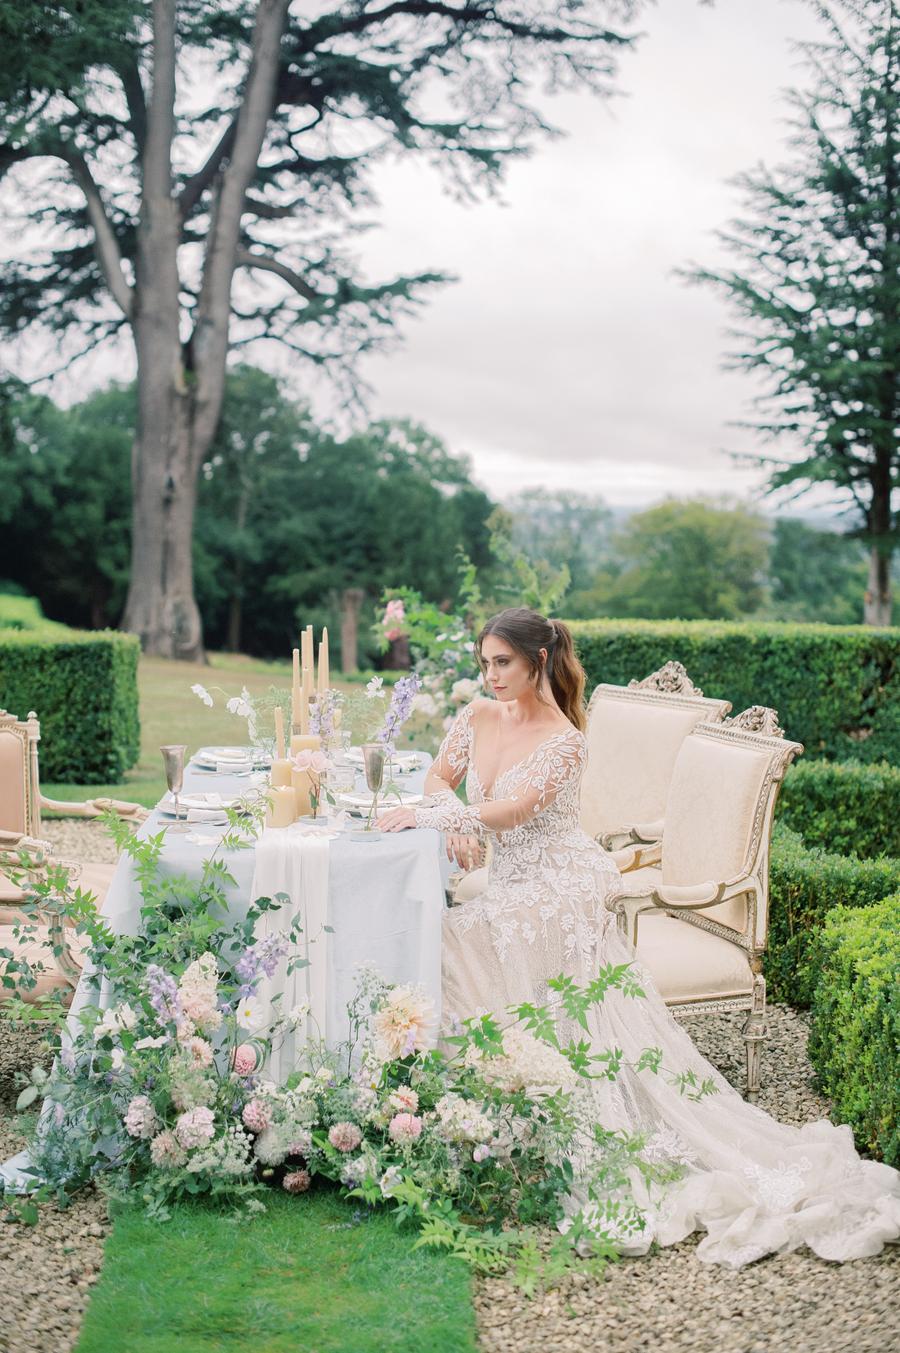 European garden wedding with an al fresco reception, luxury bridal gowns and over-the-top garden flowers || Photo by Julie Livingston with planning + design by Willow and Oak Events